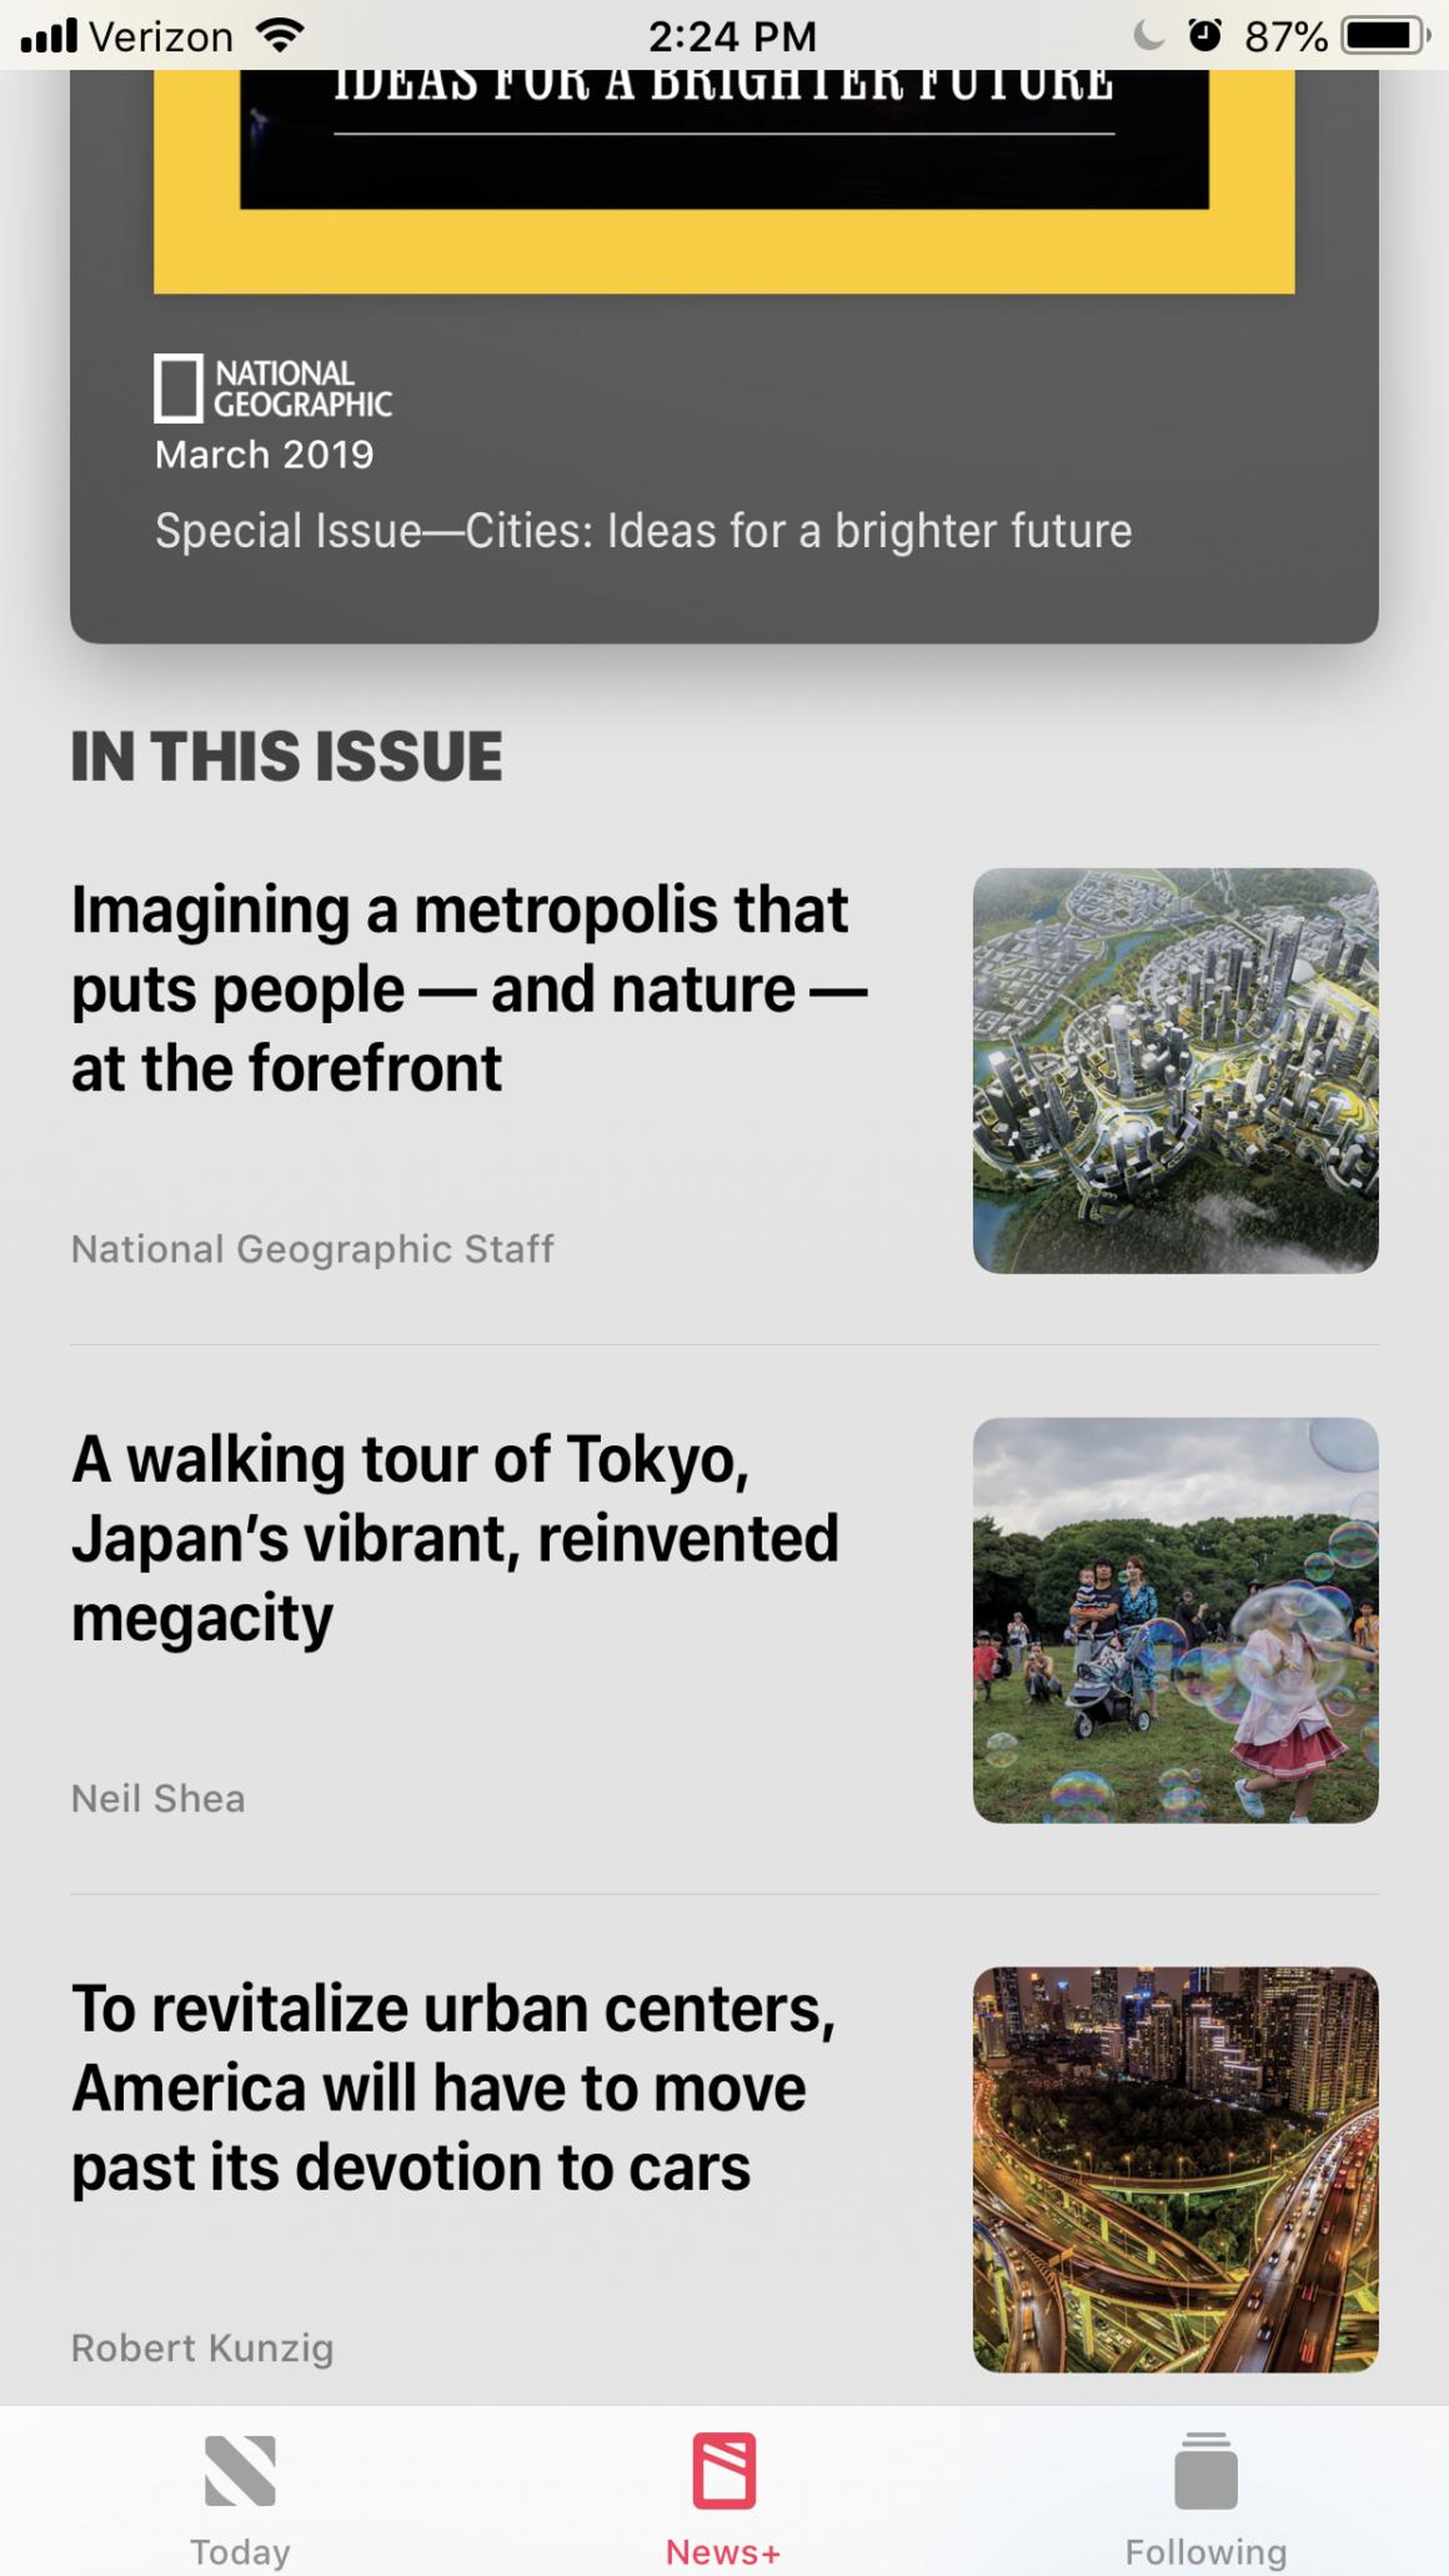 For National Geographic, the issue's table of contents in the News app featured not just headlines, but thumbnail photos from each article.